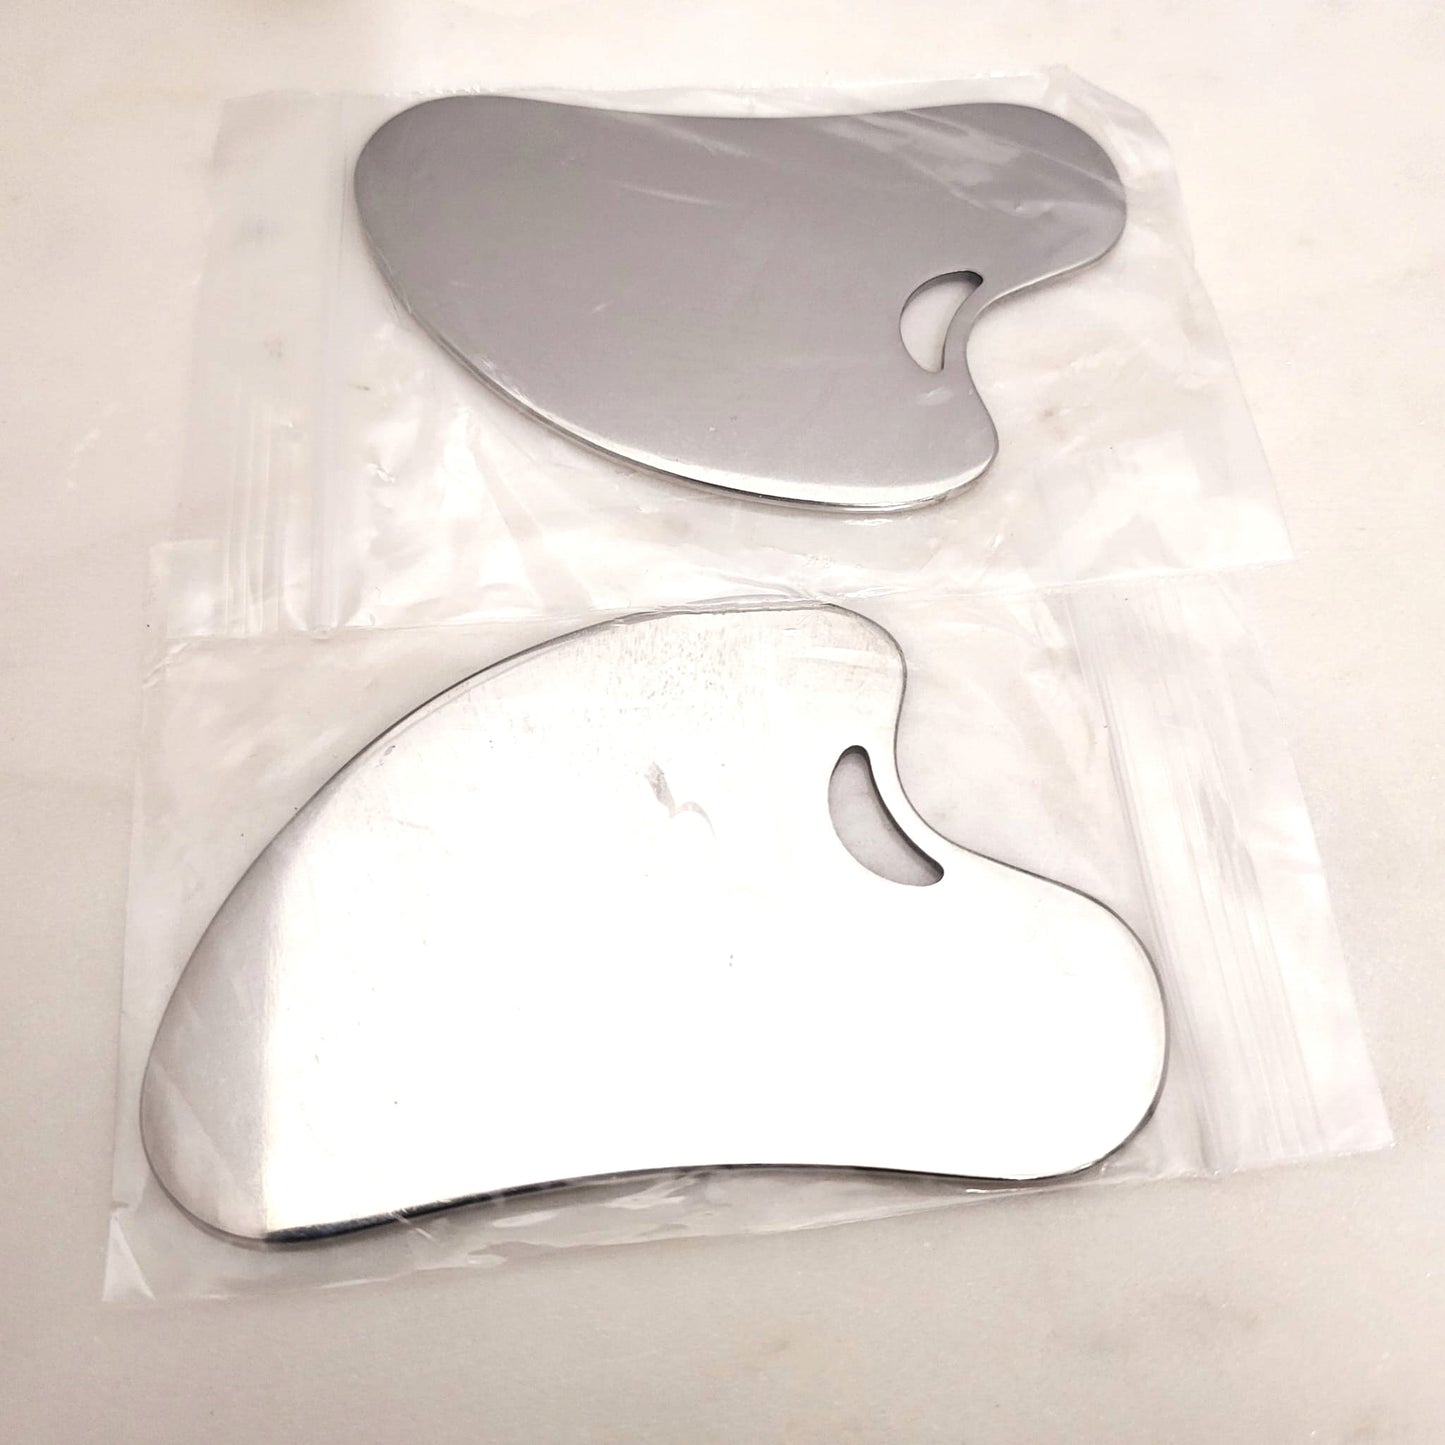 Stainless steel Gua Sha for Face & Body - 2 PACK DEAL